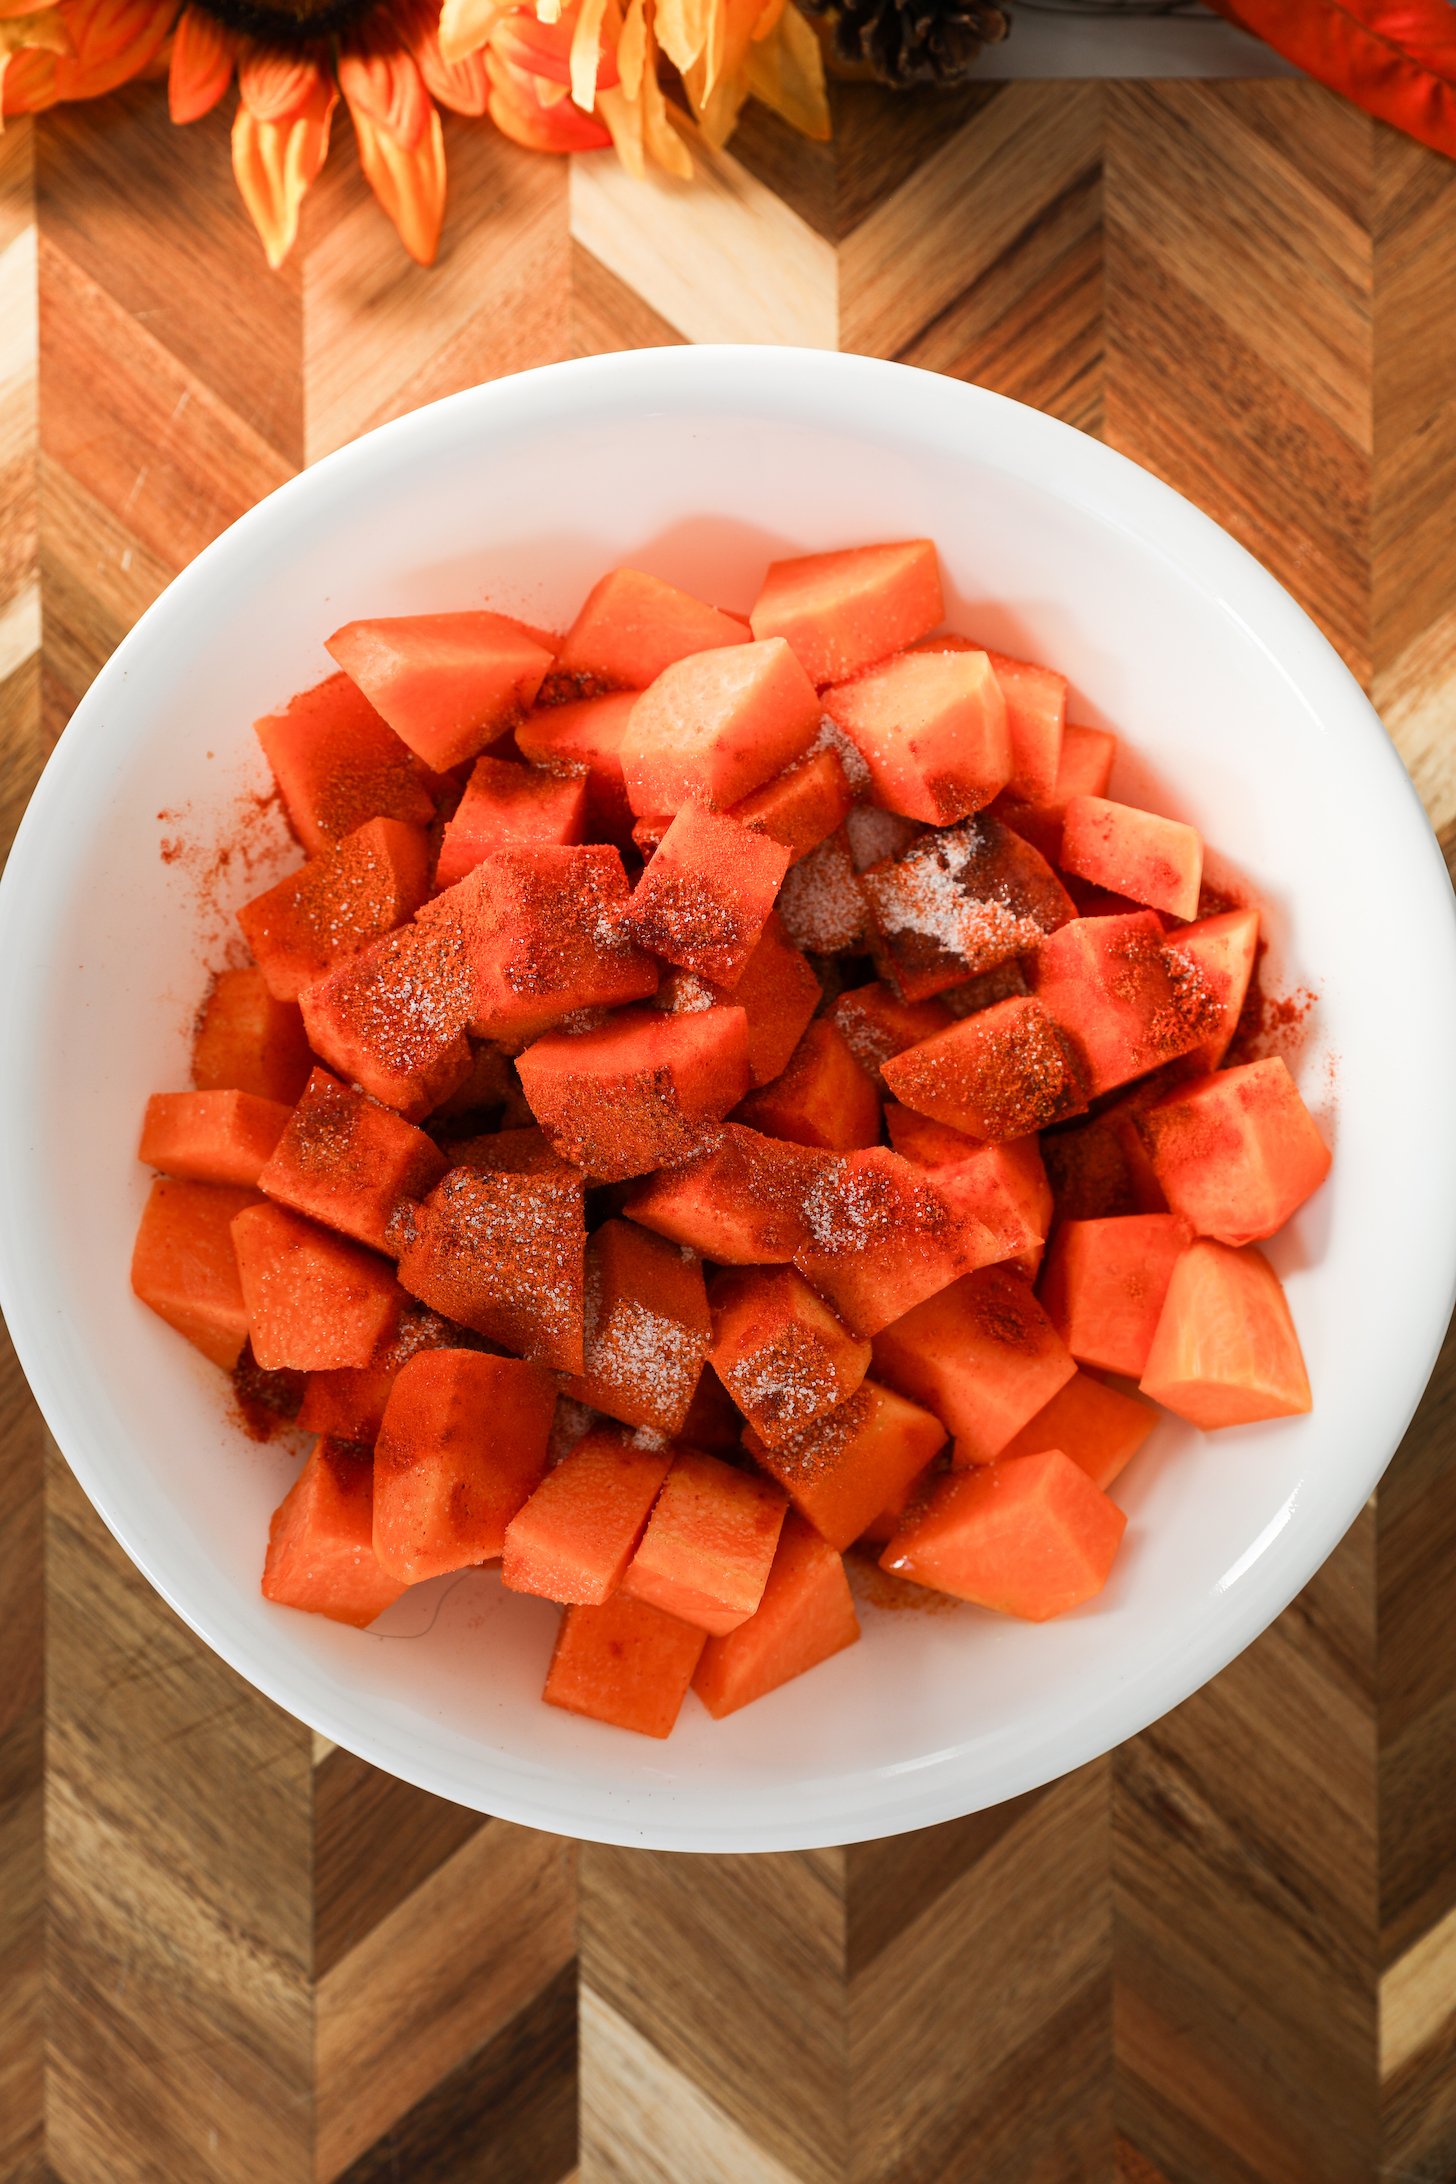 A large bowl of pumpkin chunks topped with powdered spices, surrounded on a wooden board.